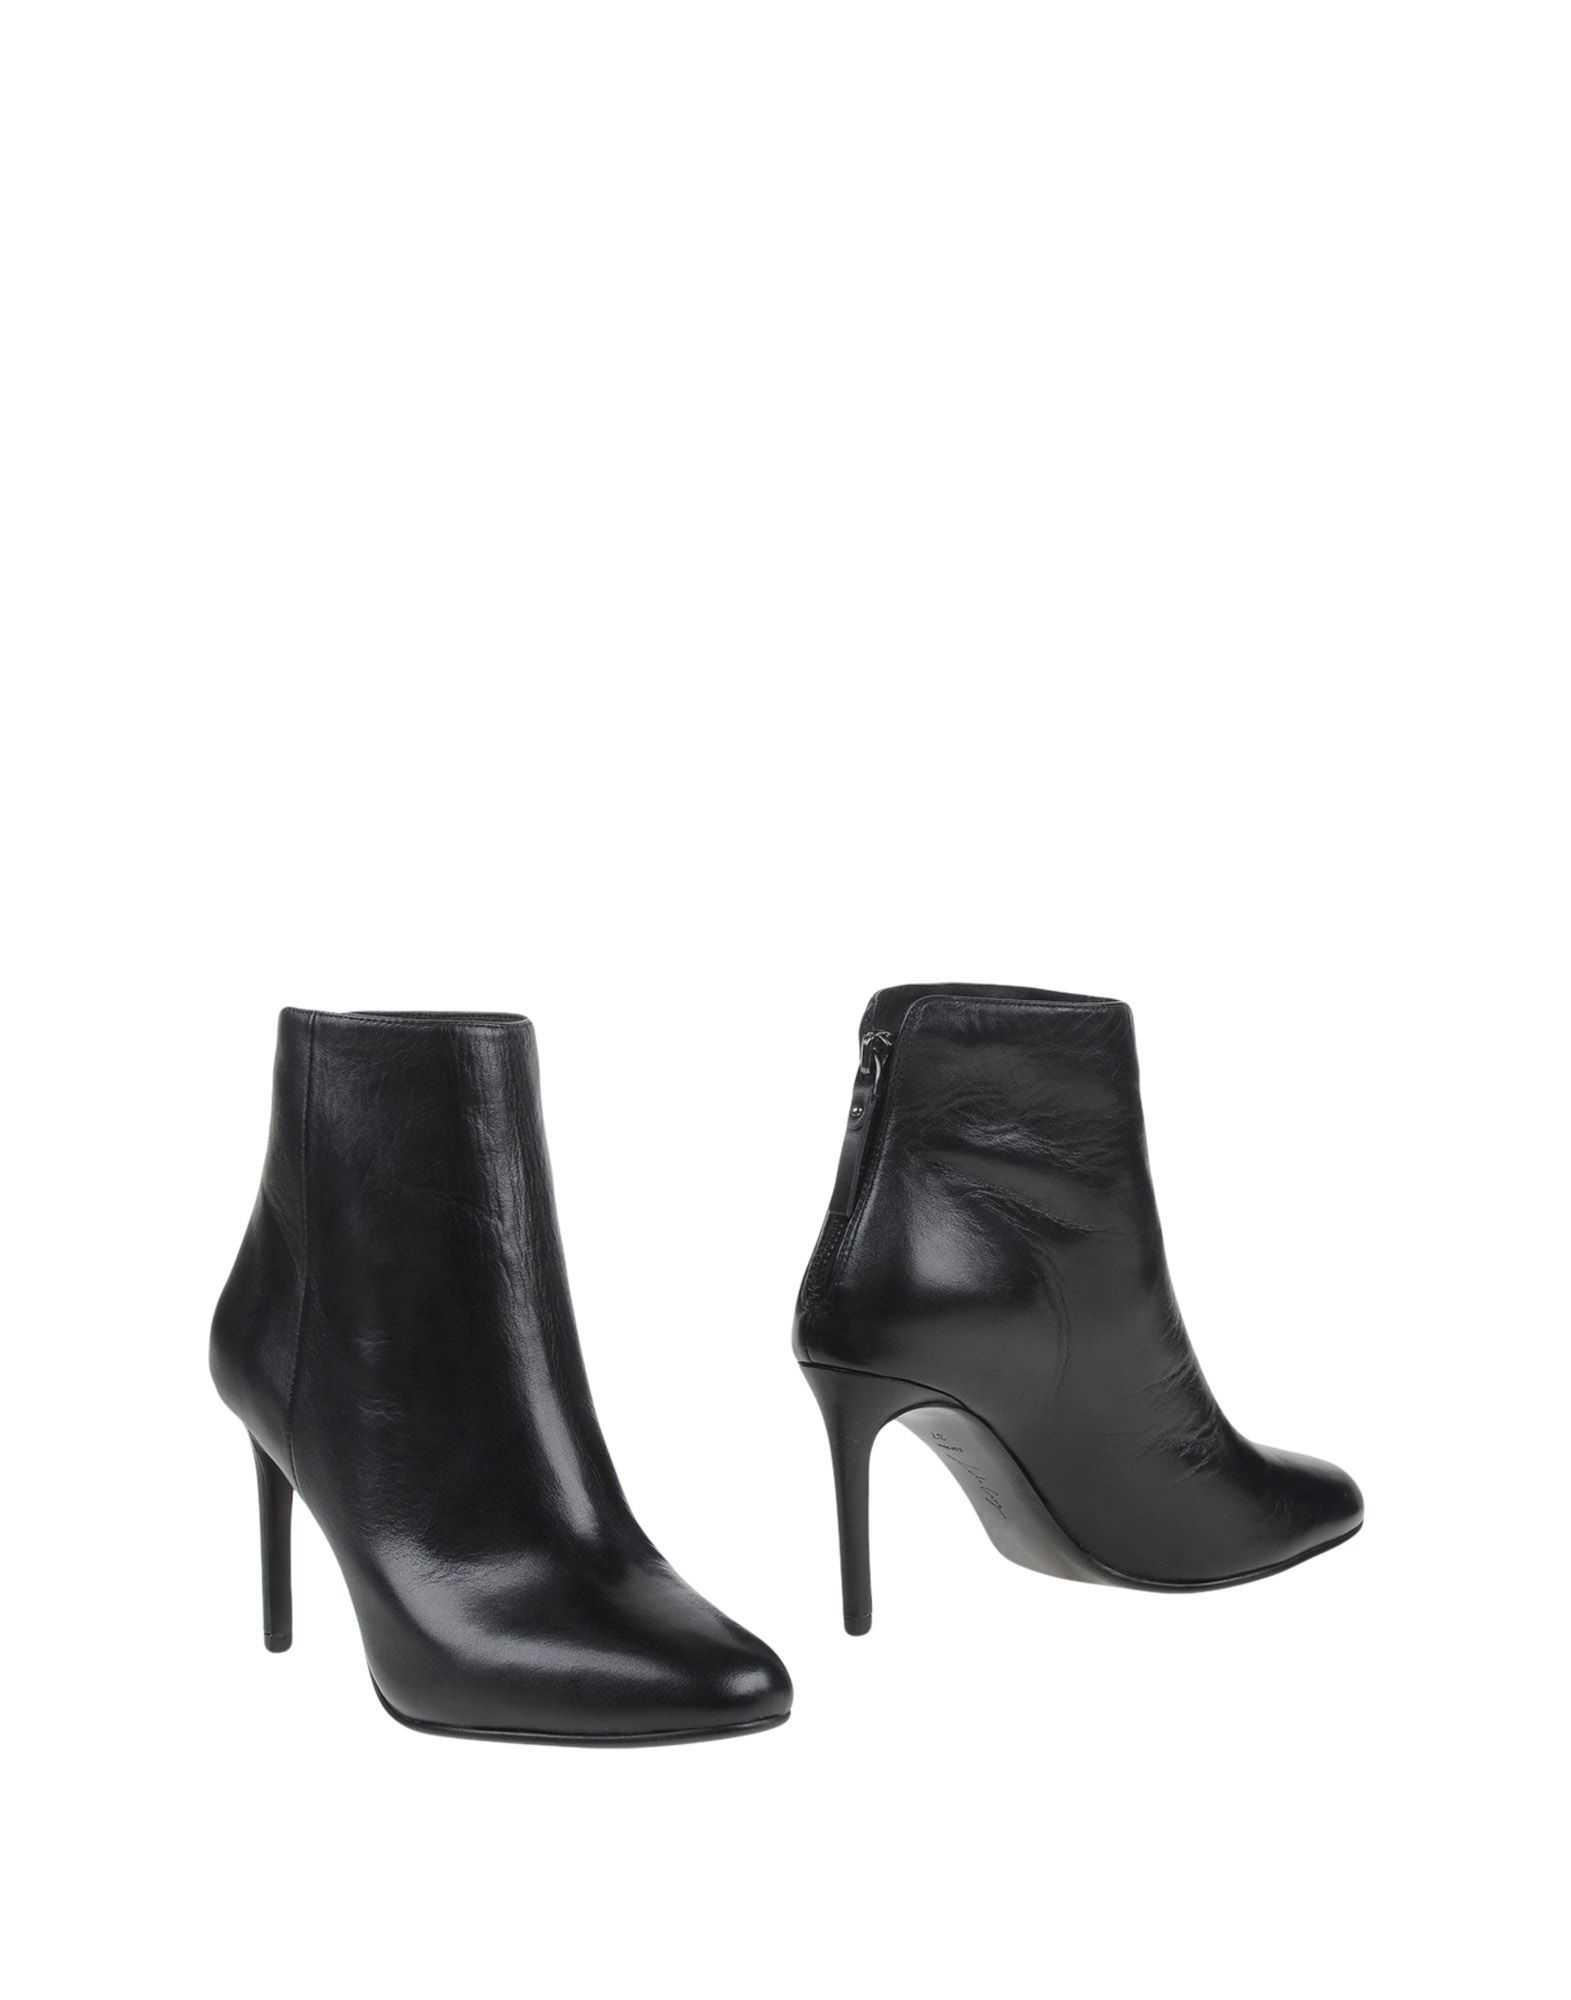 Lola cruz Ankle Boots in Black | Lyst